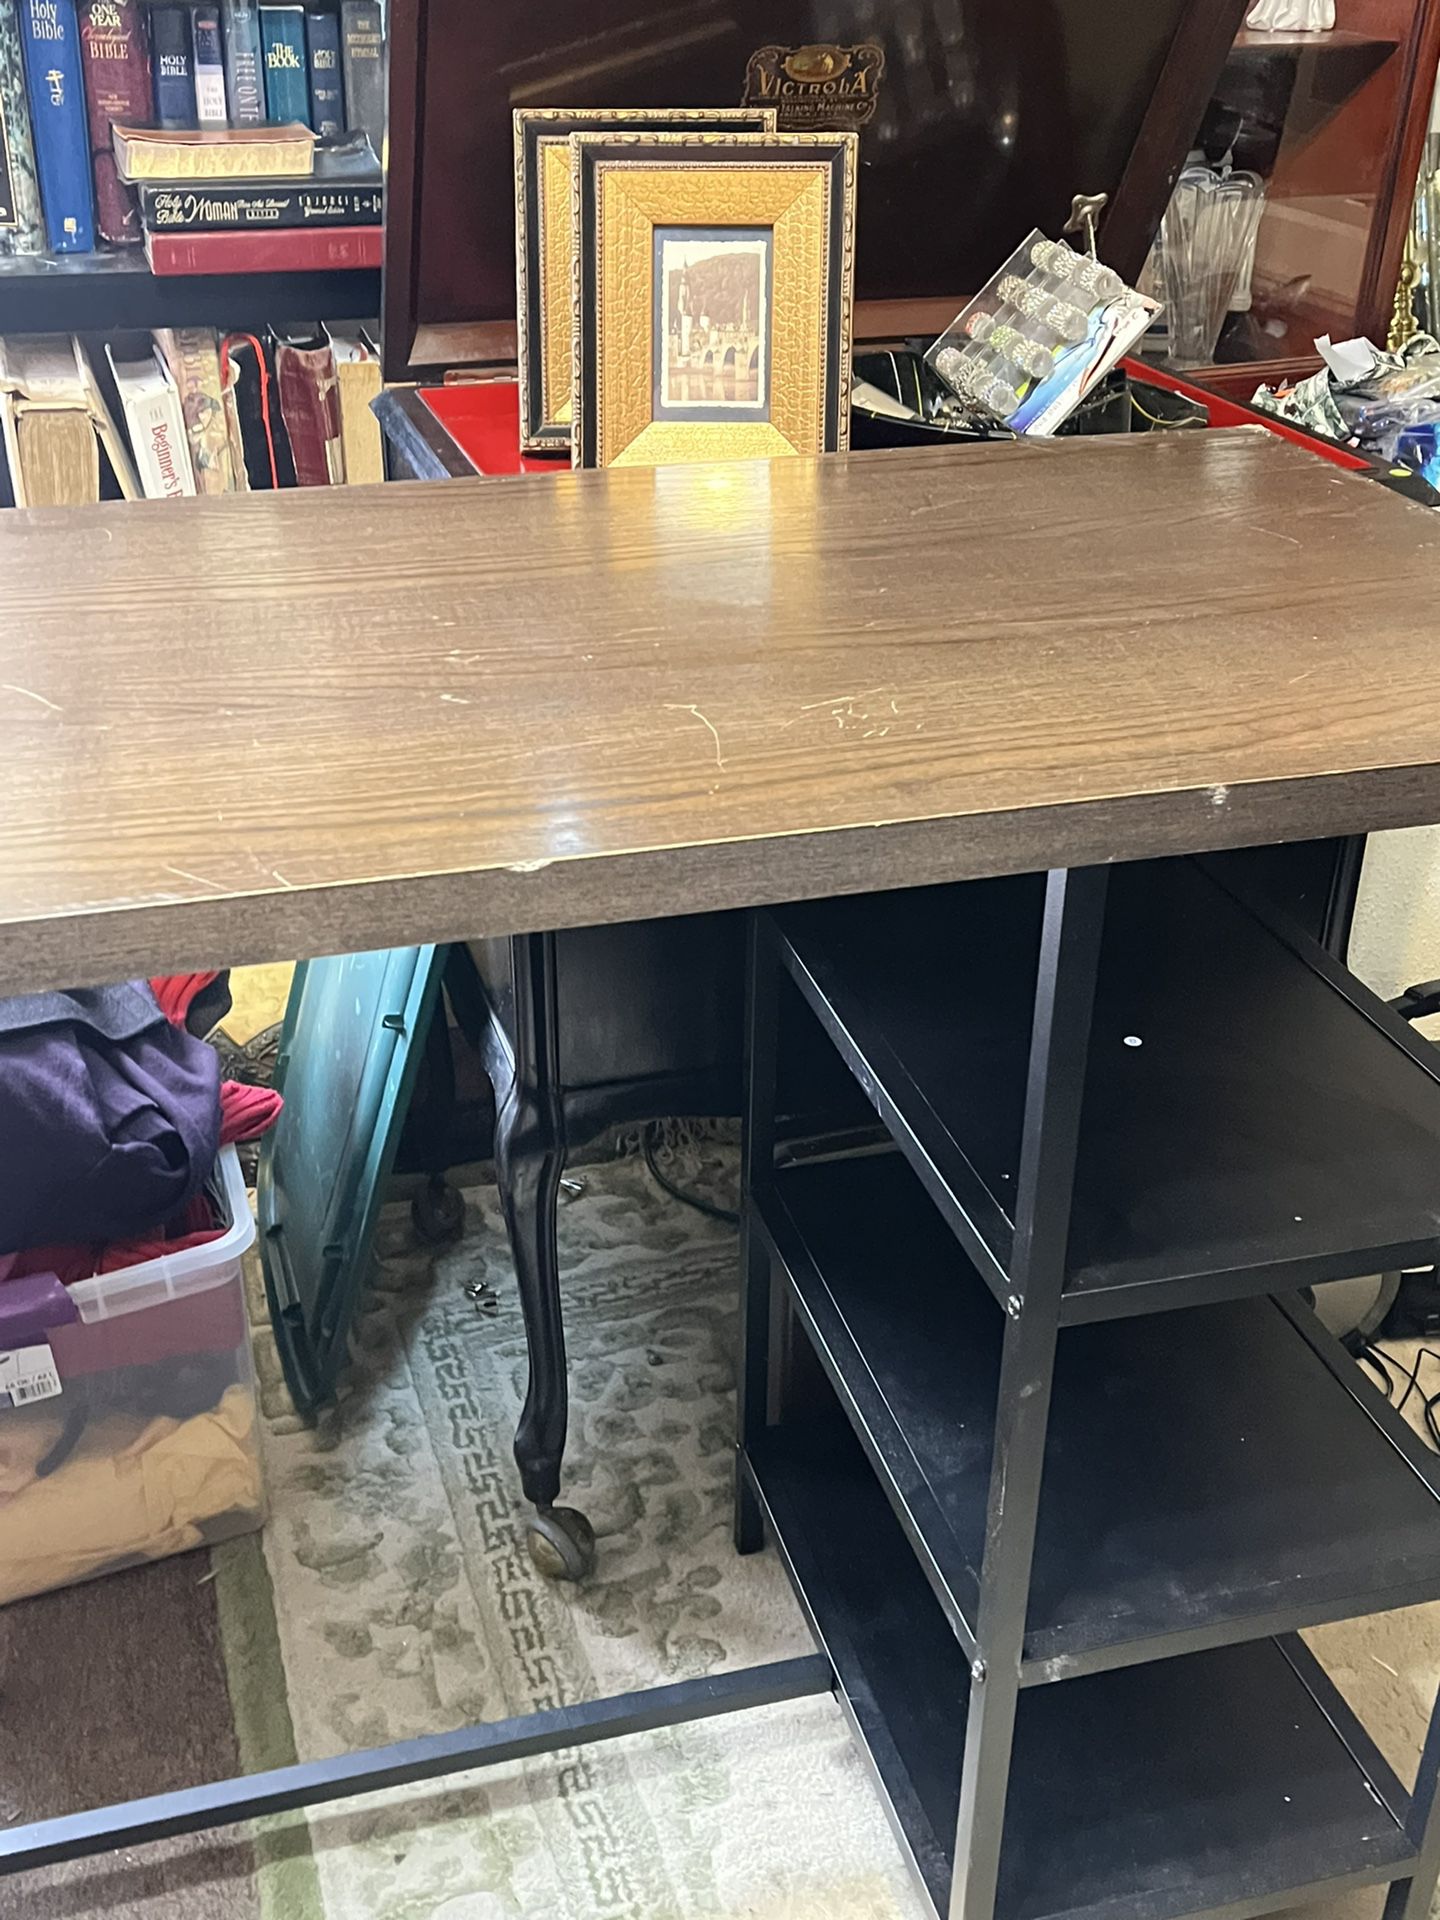 Pub Table With 2 Stools (Fayettville Ga